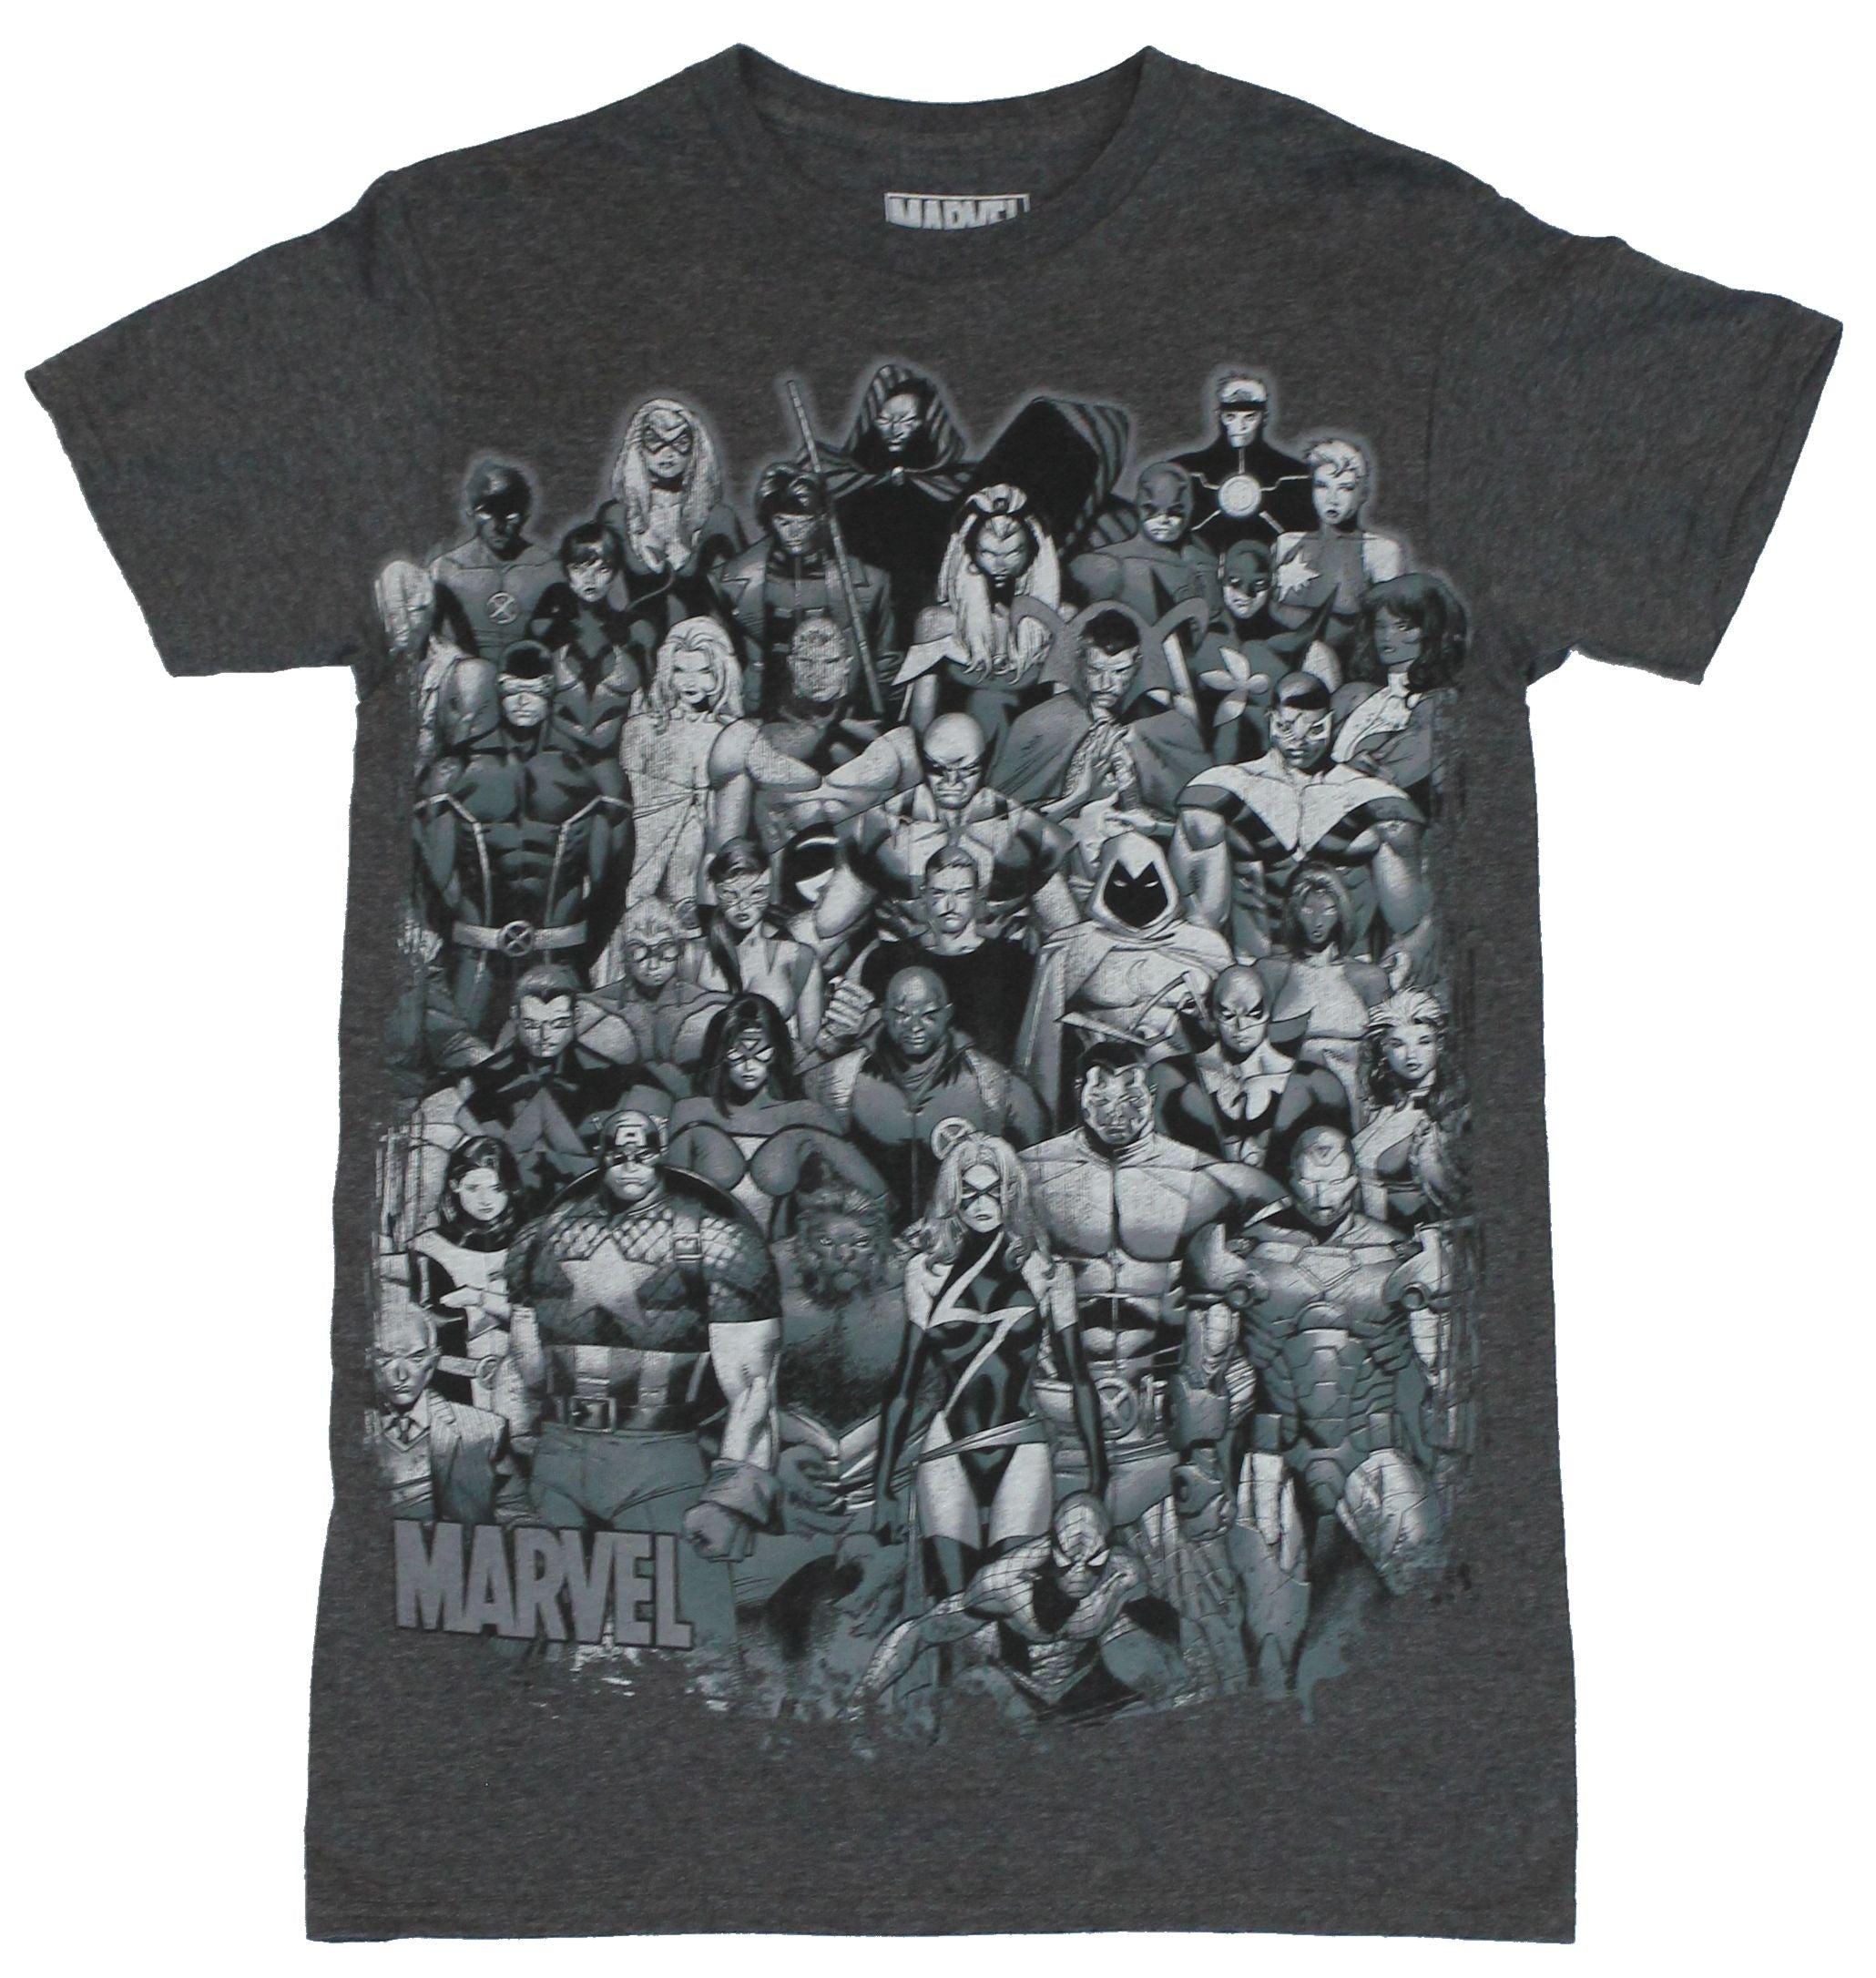 Marvel Comics Mens T-Shirt - Giant Cast of Marvel Heroes In Grayscale Image